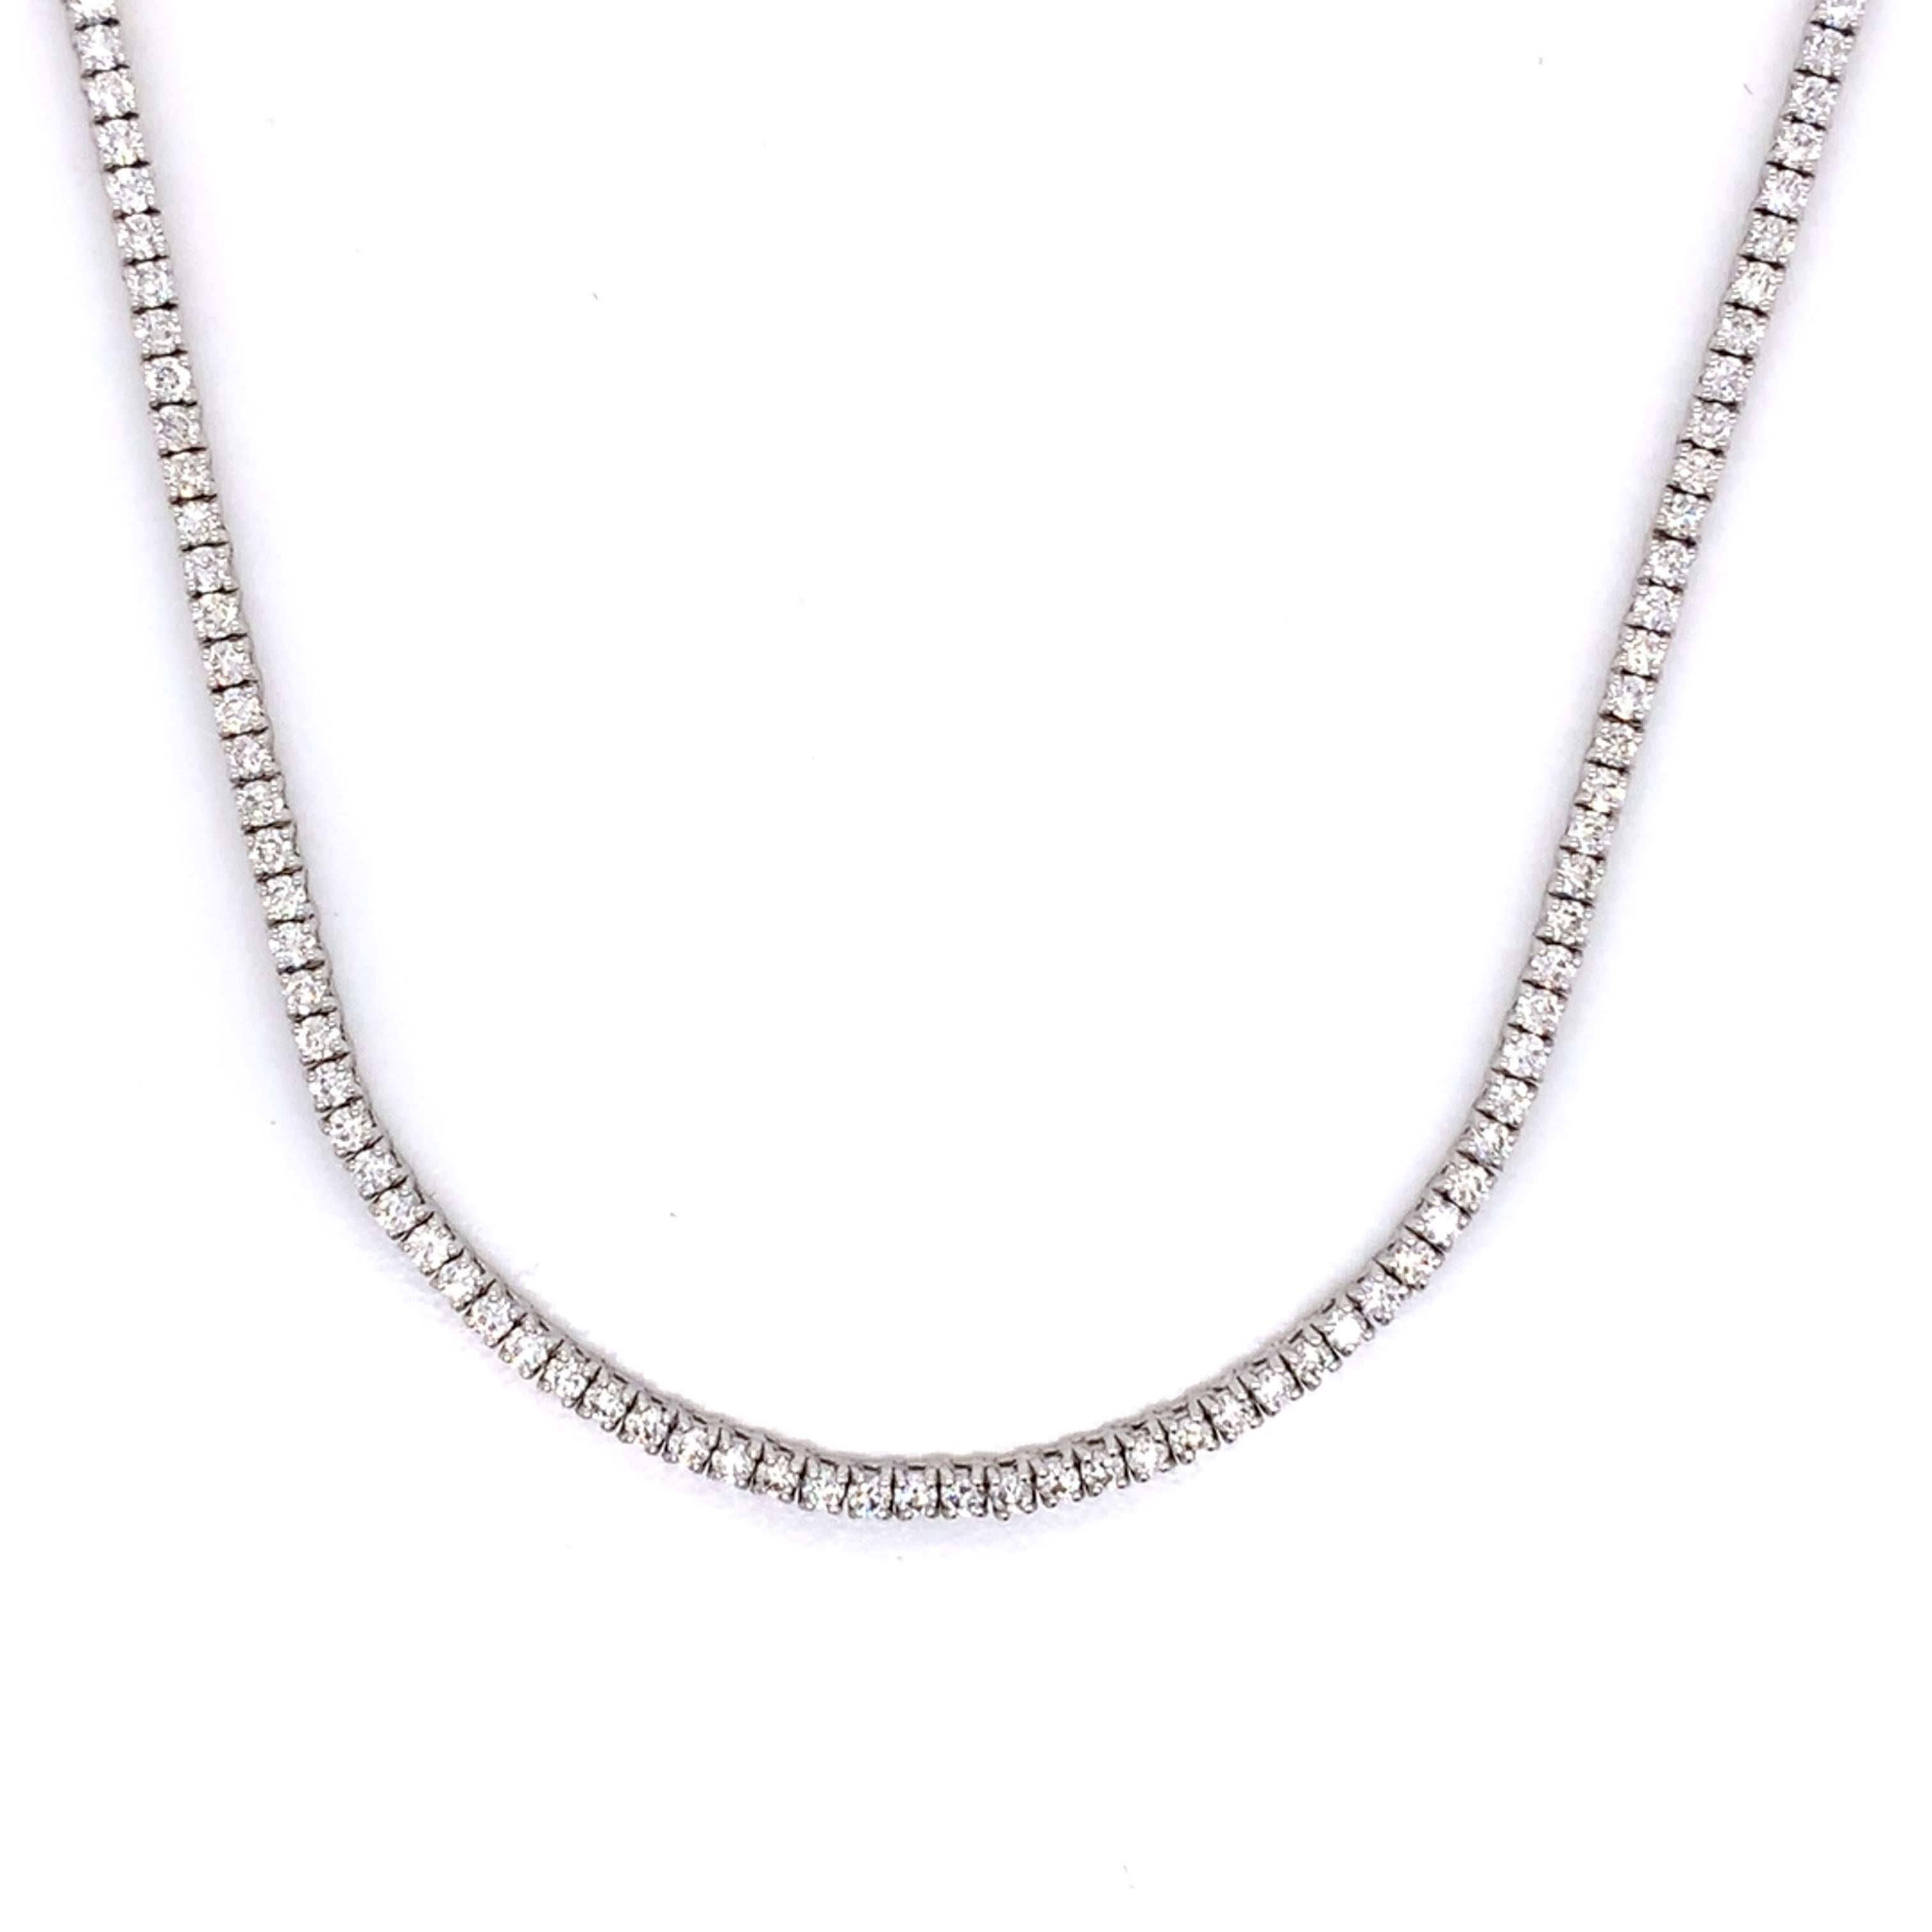 Diamond necklace made with real/natural brilliant cut diamonds. Total Carat Weight: 4.50cts. Diamond Quantity: 238 round diamonds. Color: G. Clarity: SI1. Mounted on 18 karat white gold.